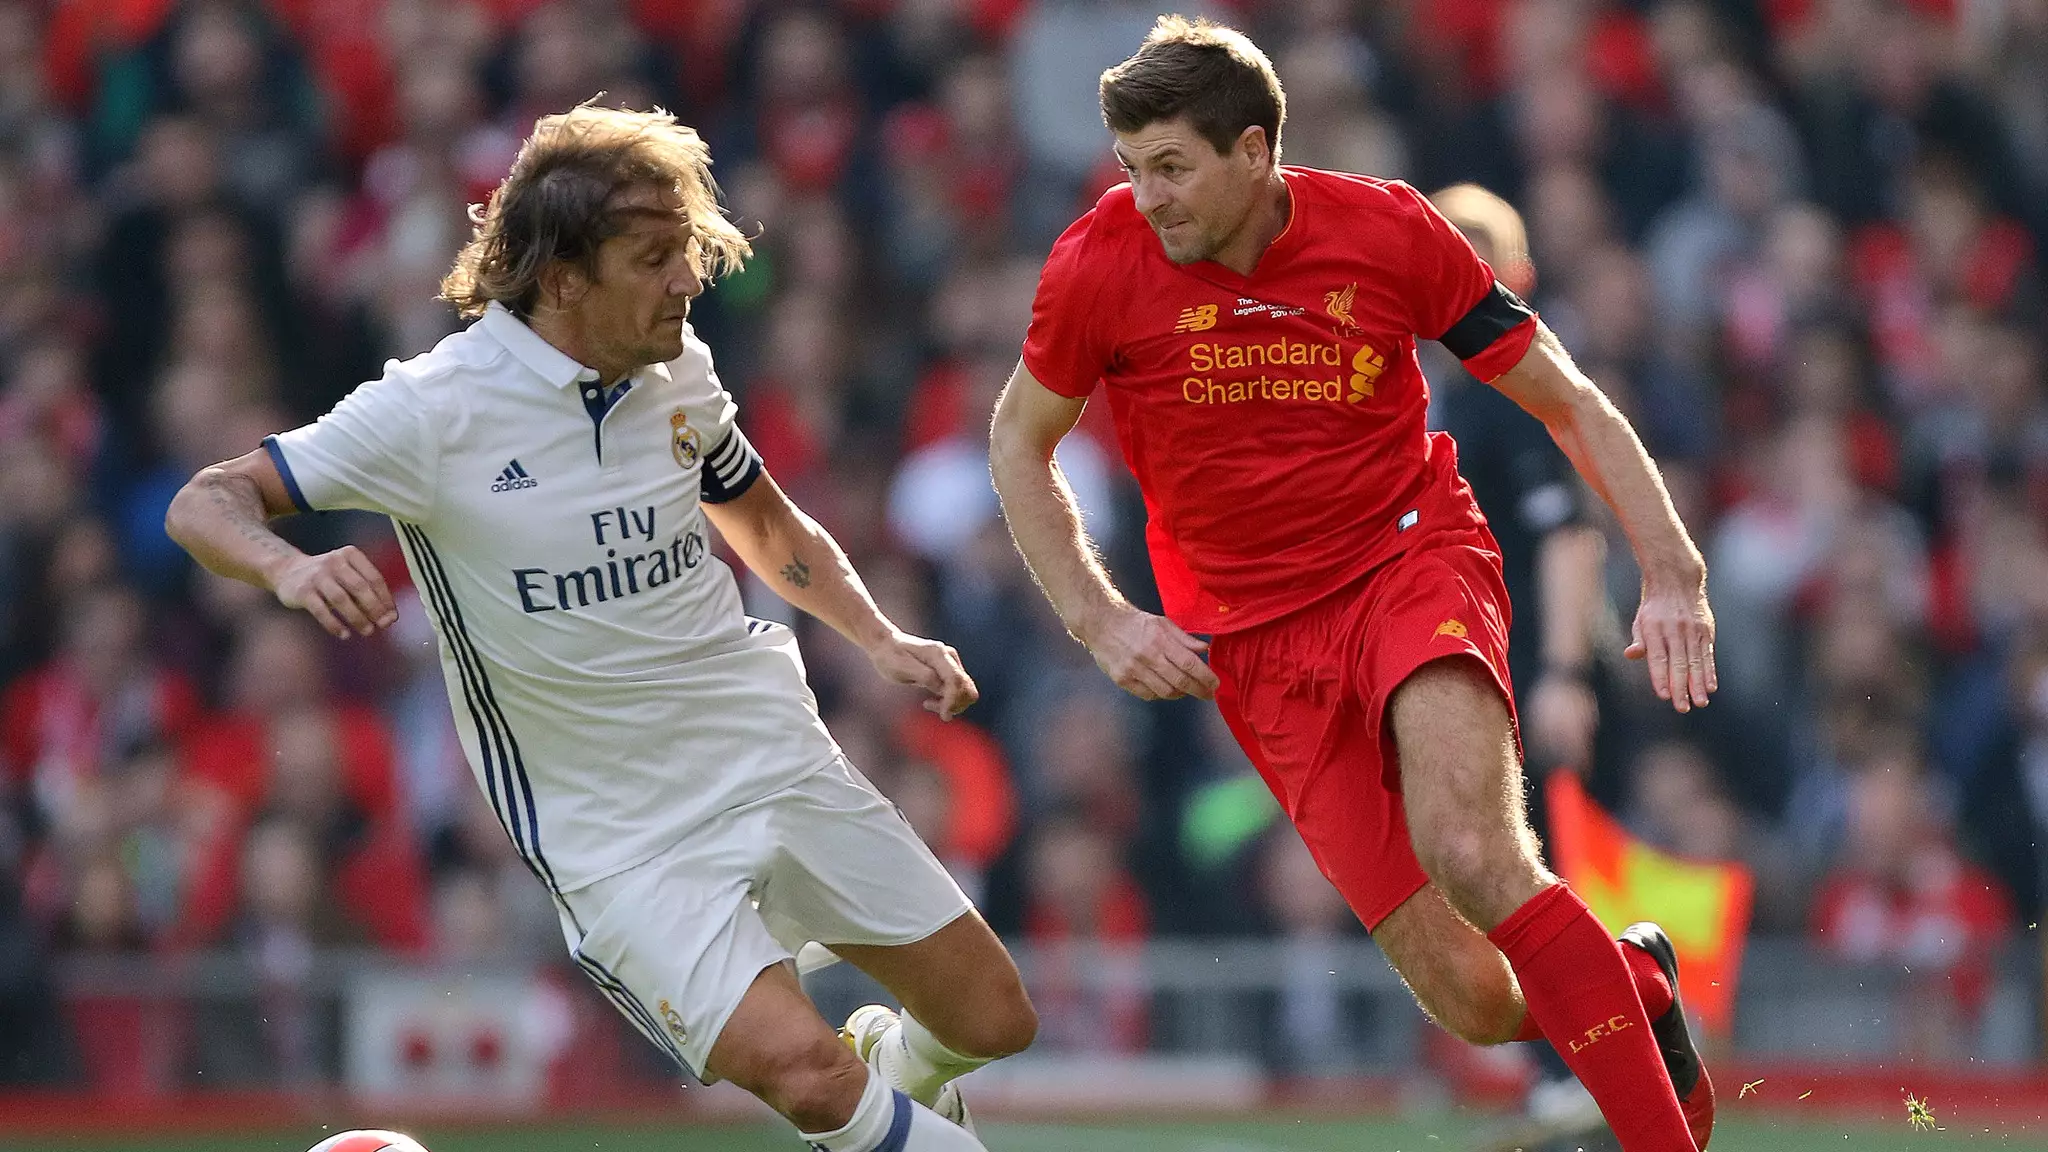 Steven Gerrard Names The Current Liverpool Player He Wishes He Played With